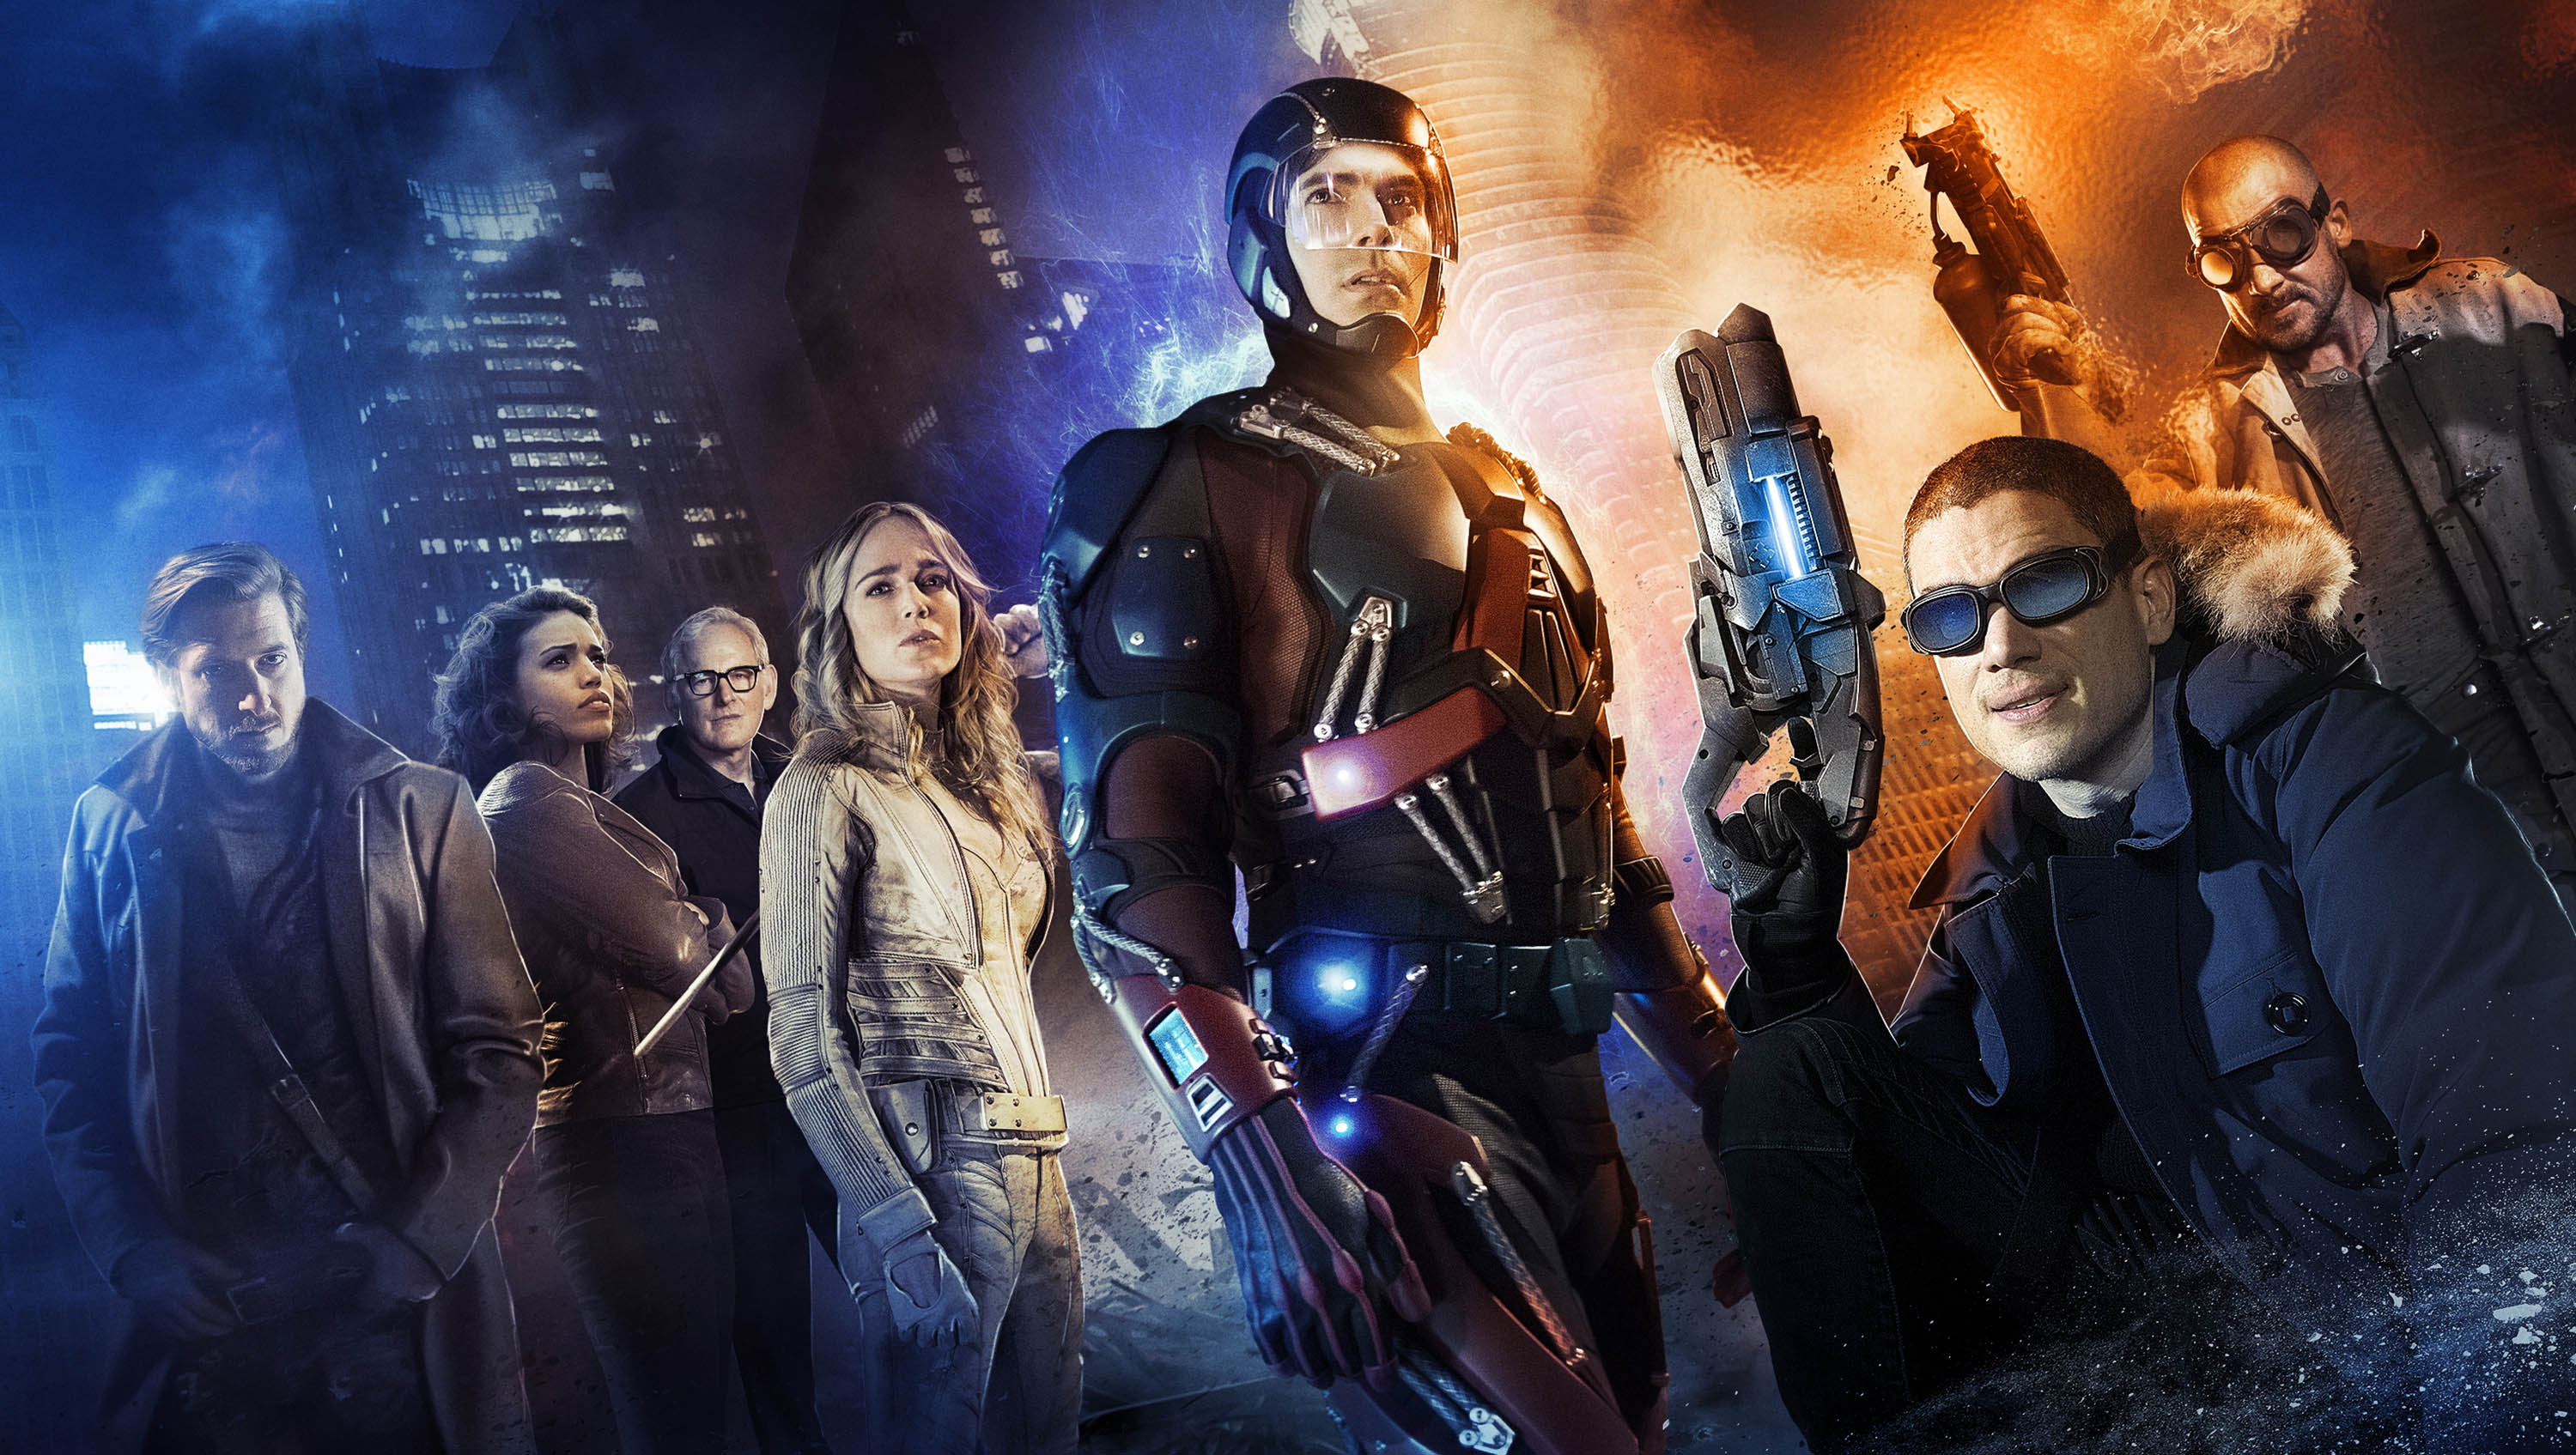 tv show, dc's legends of tomorrow, arthur darvill, atom (dc comics), brandon routh, caity lotz, captain cold, ciara renée, dominic purcell, hawkgirl (dc comics), heat wave (dc comics), kendra sanders, martin stein, rip hunter, victor garber, wentworth miller, white canary (dc comics) High Definition image